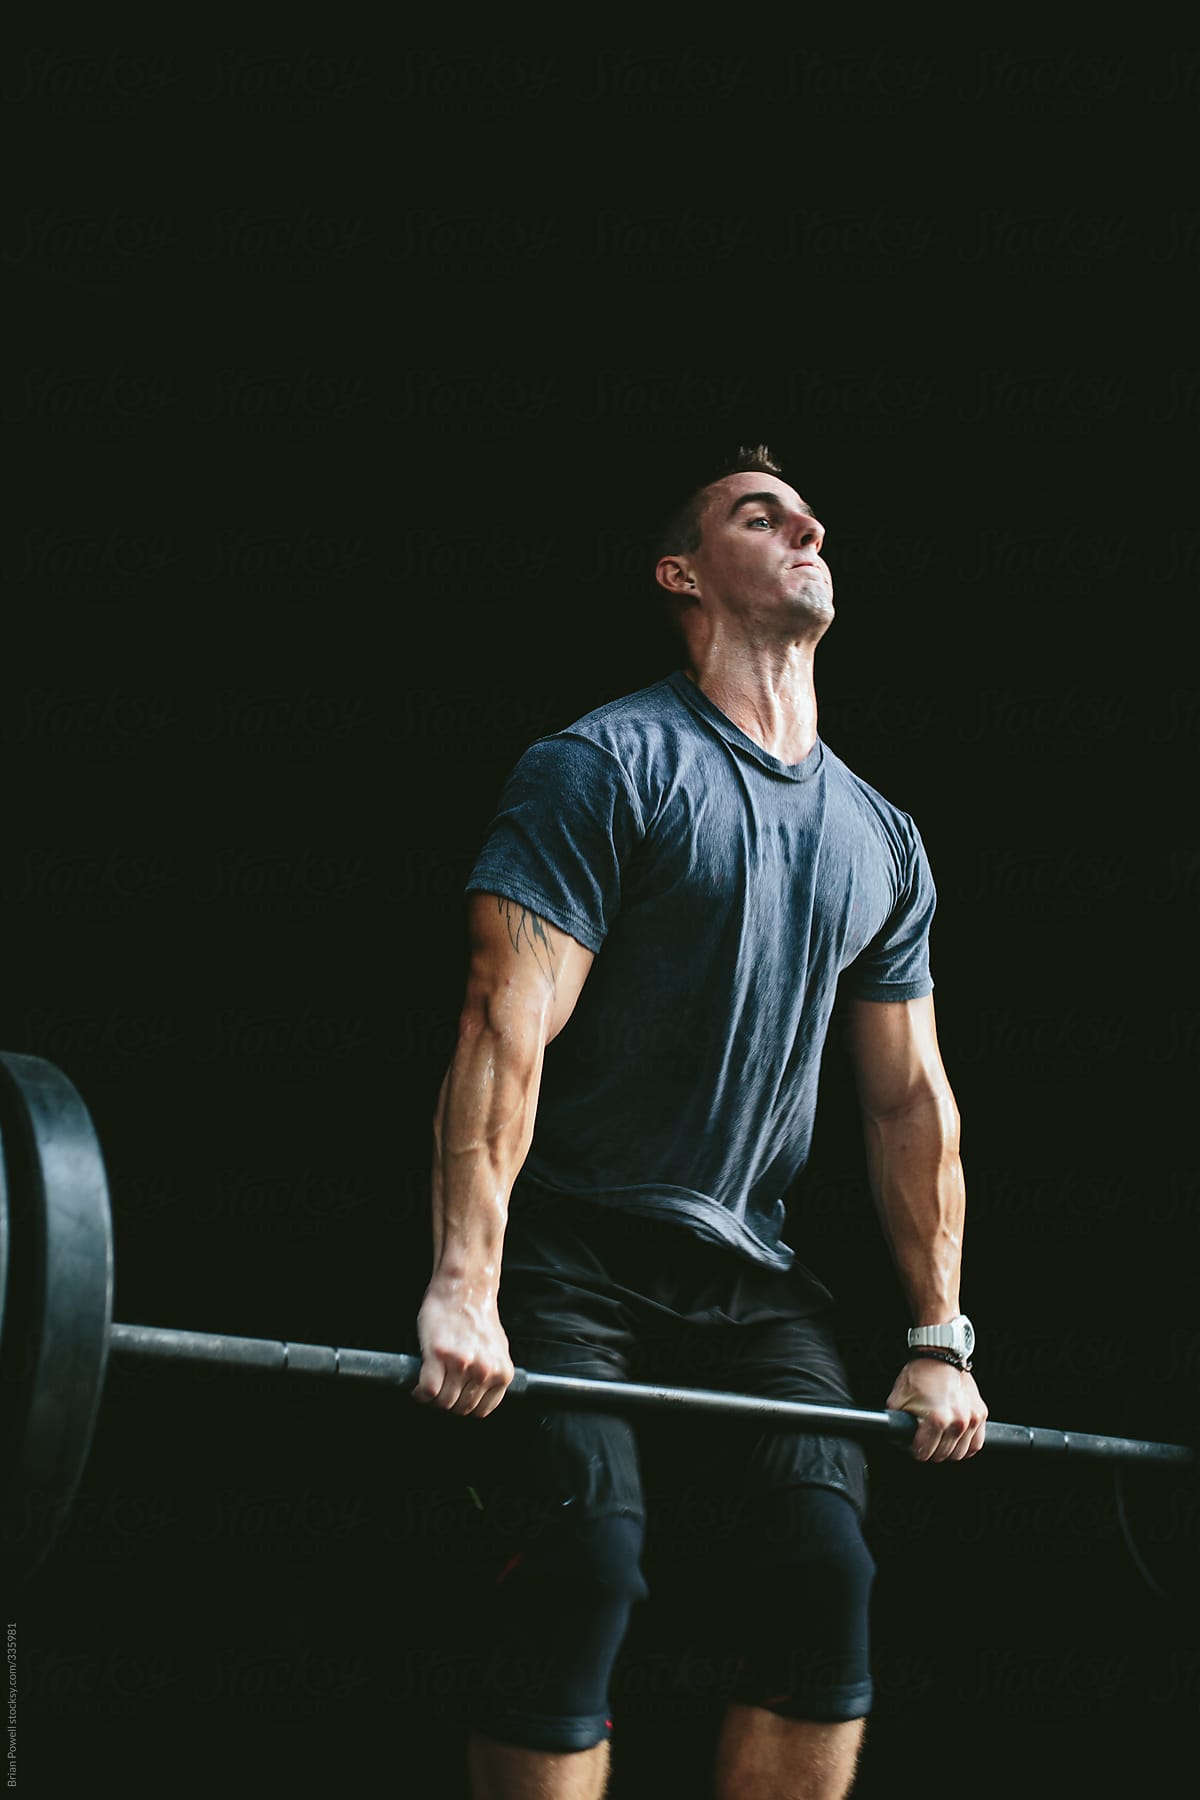 man doing Olympic clean-and-jerk lifting